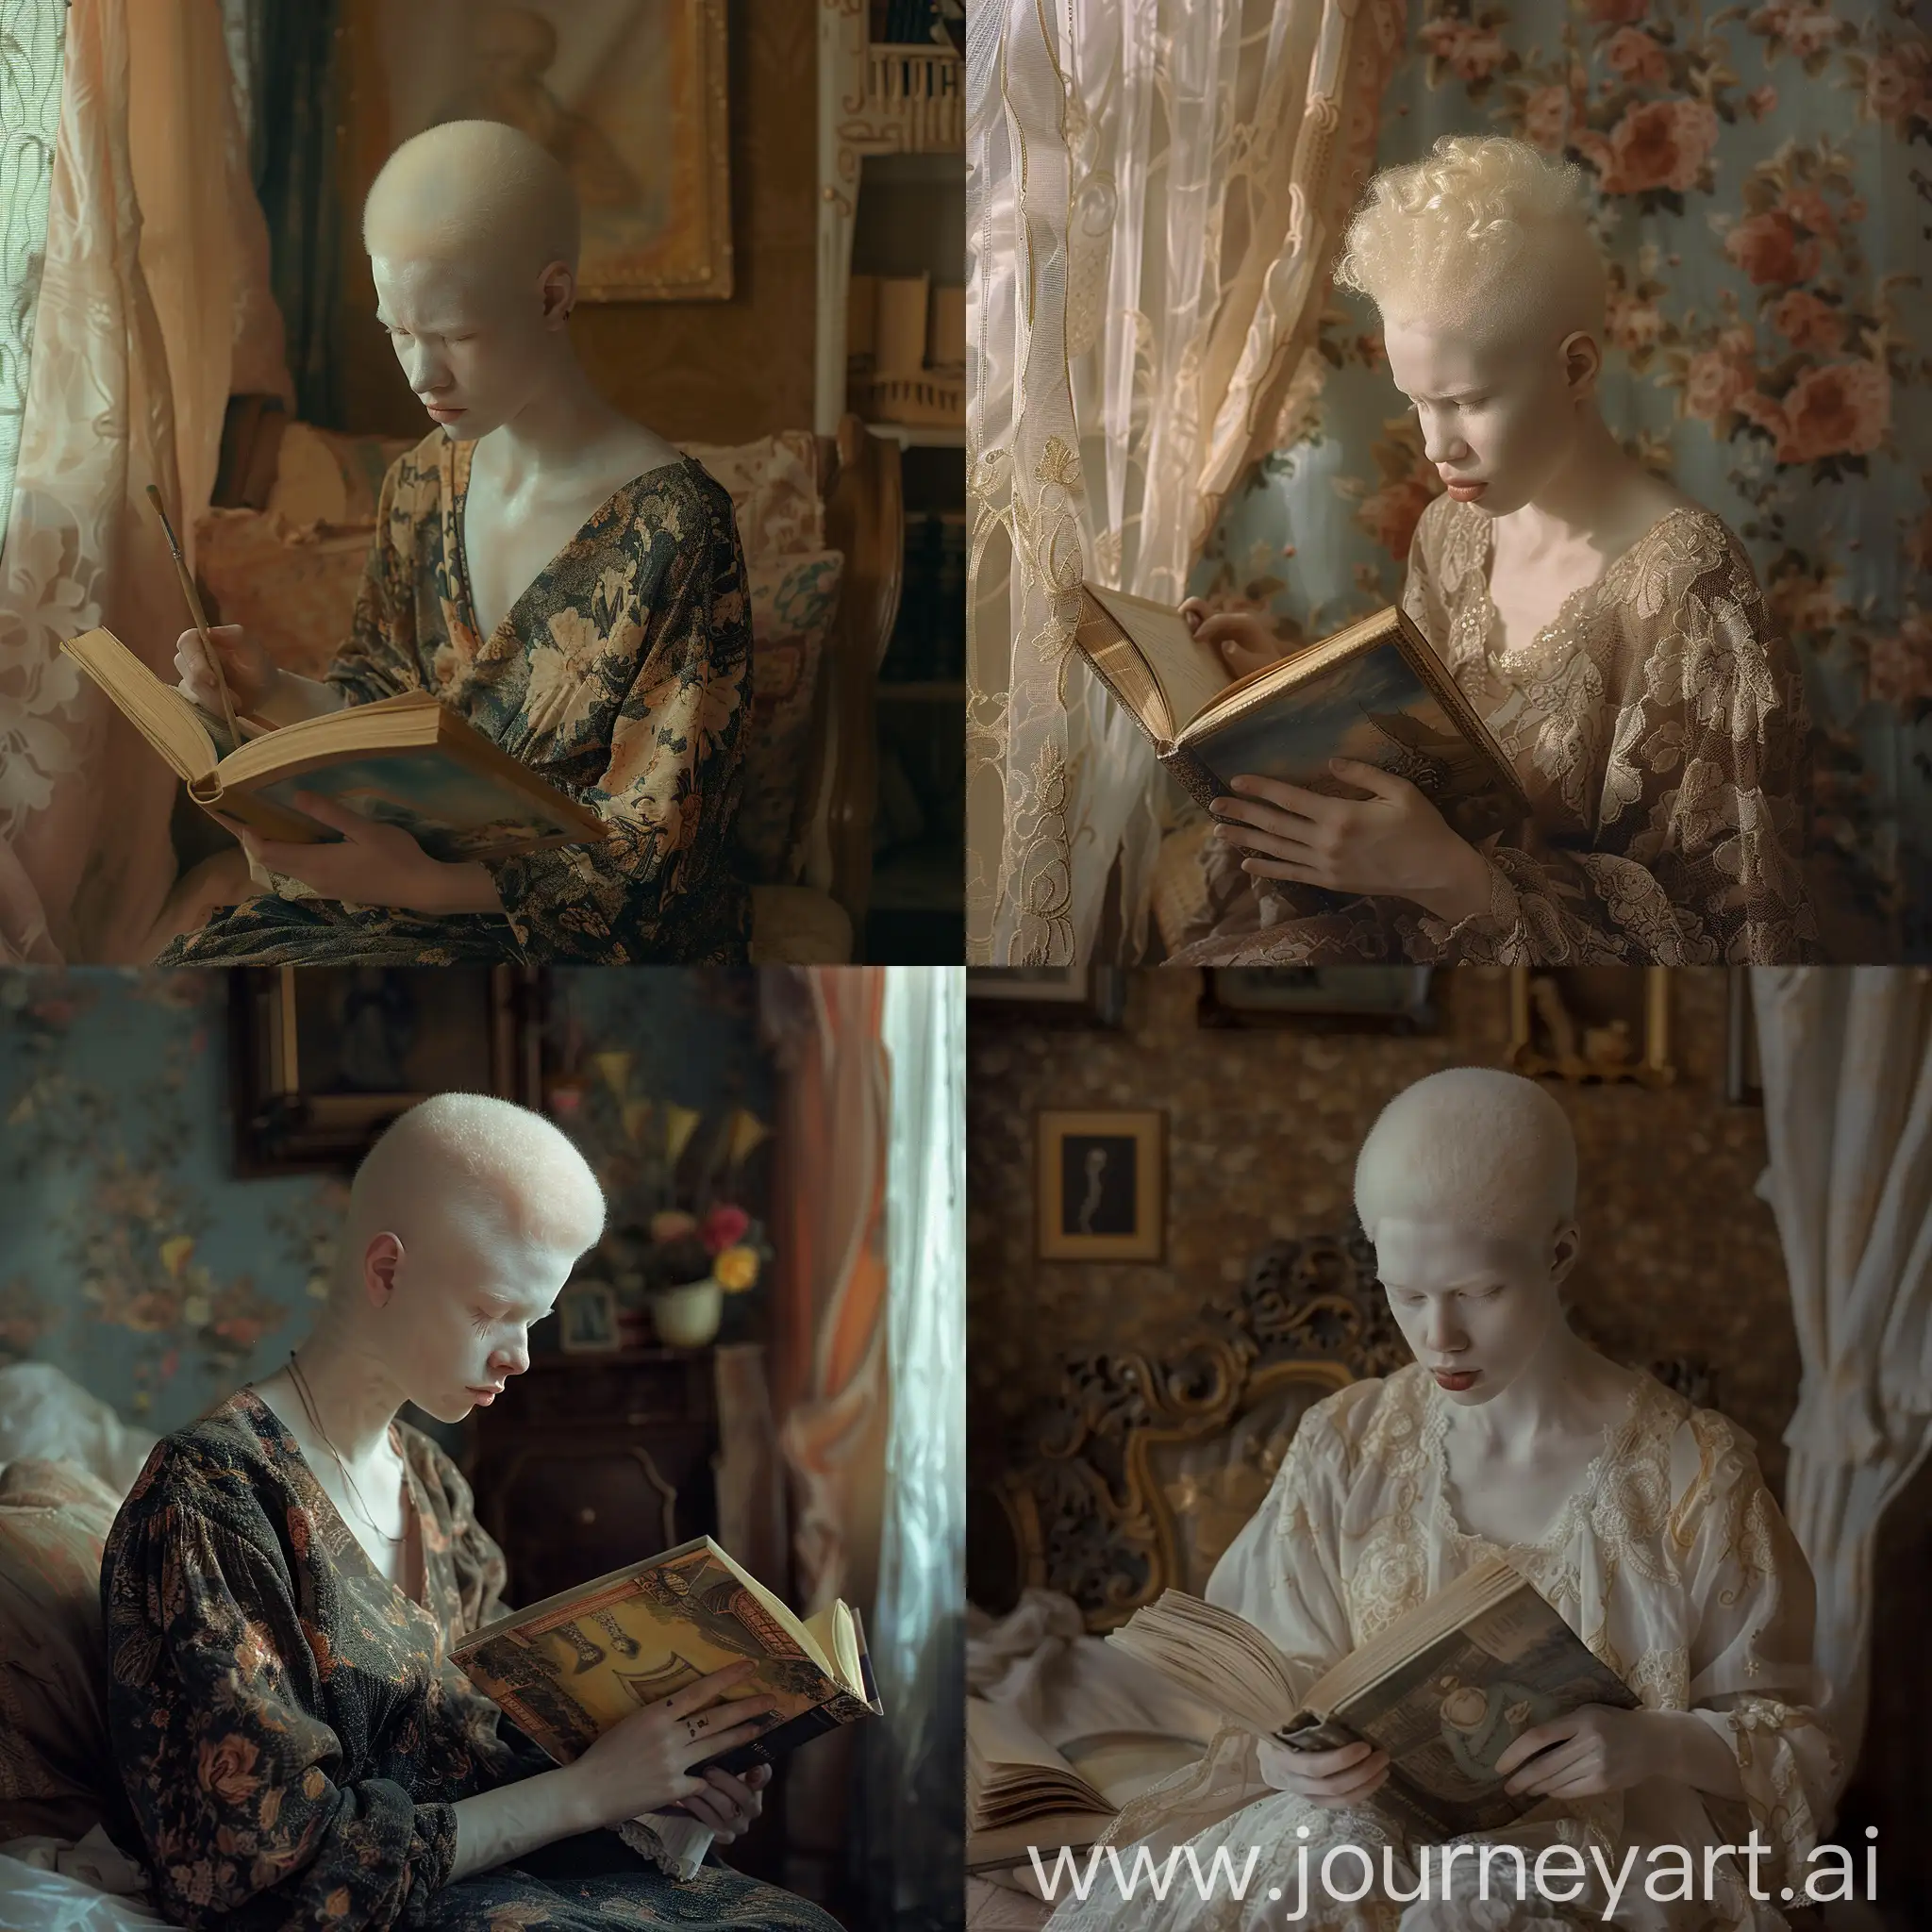 Albino-Woman-Finding-Solace-in-Quiet-Moments-Reading-and-Painting-in-Warm-Light